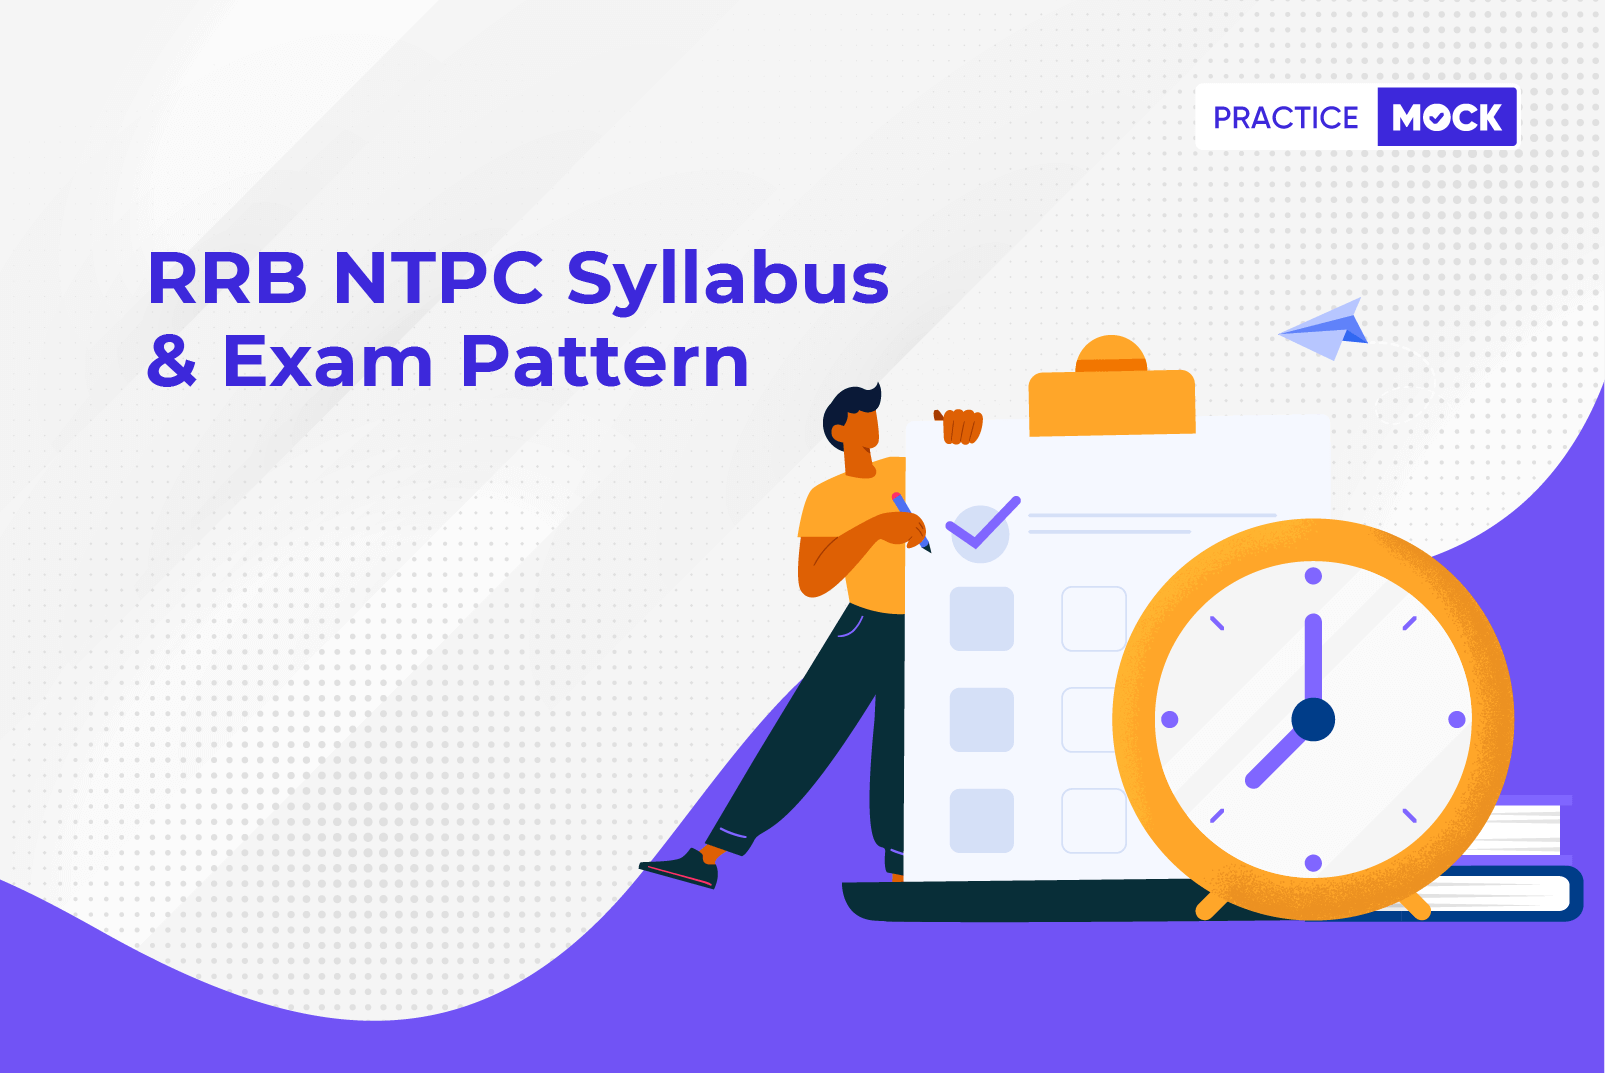 RRB NTPC Syllabus for CBT 2 & CBT 1 Exam